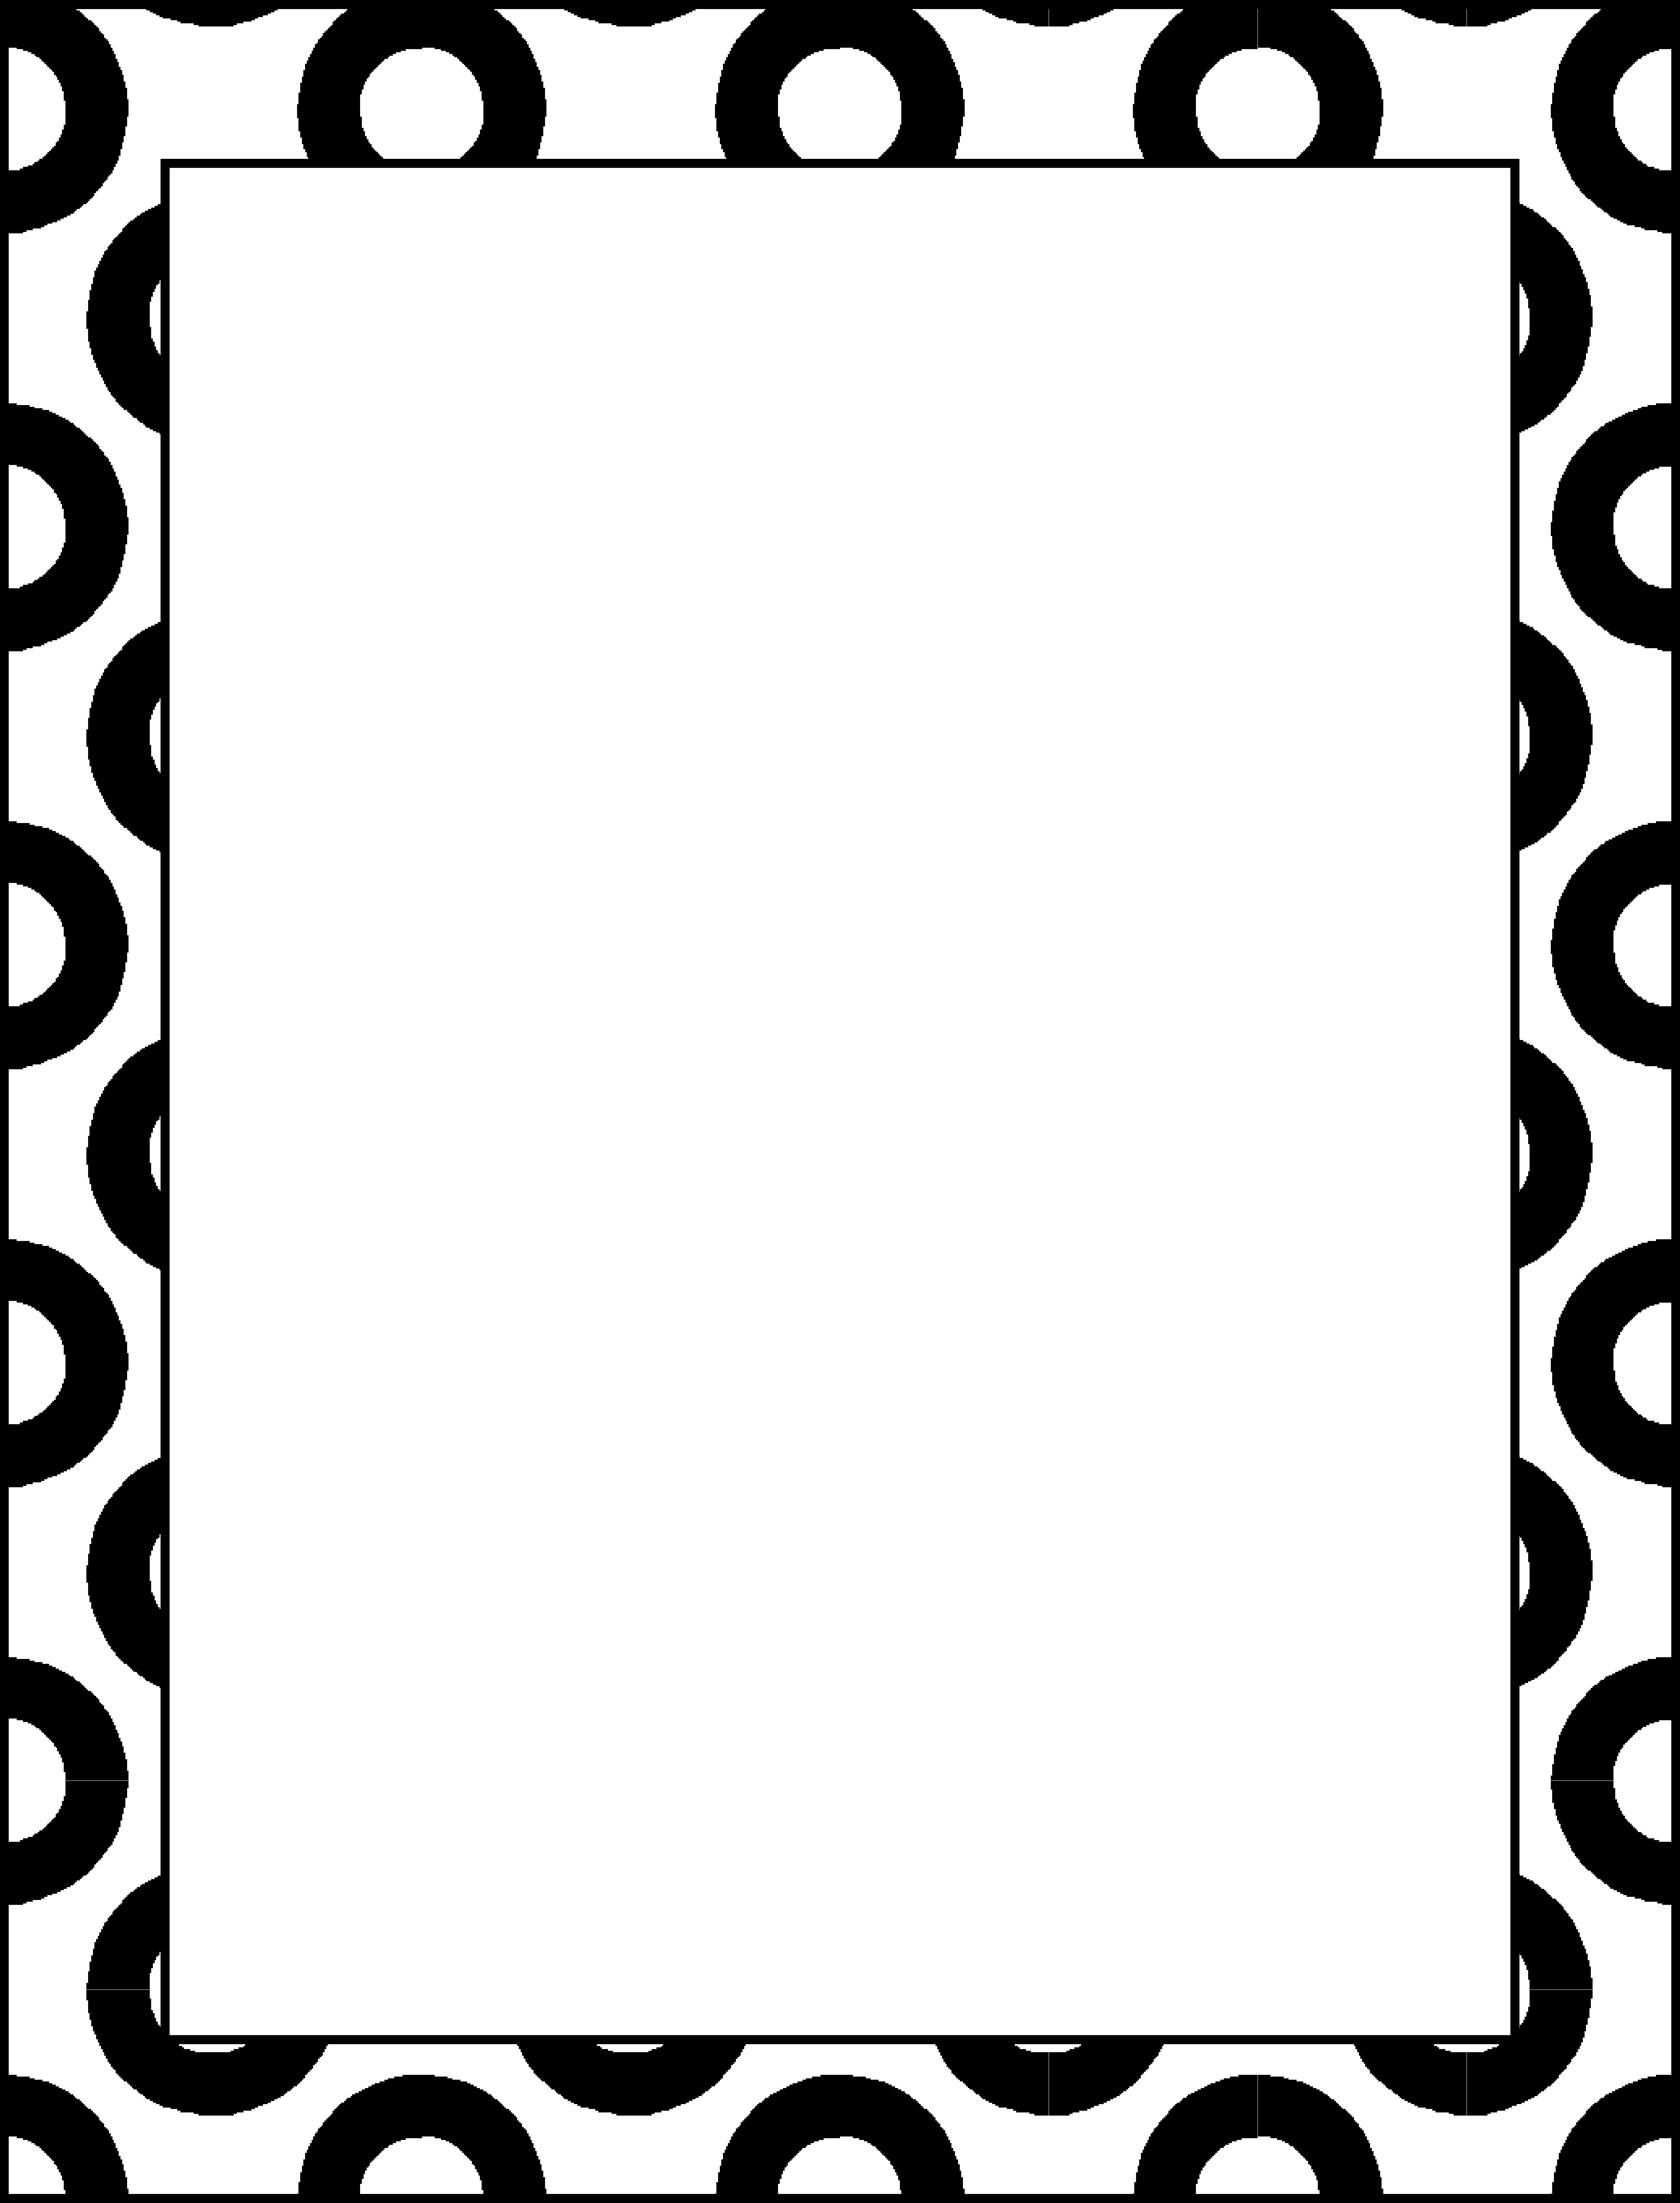 Pretty Simple Borders - ClipArt Best